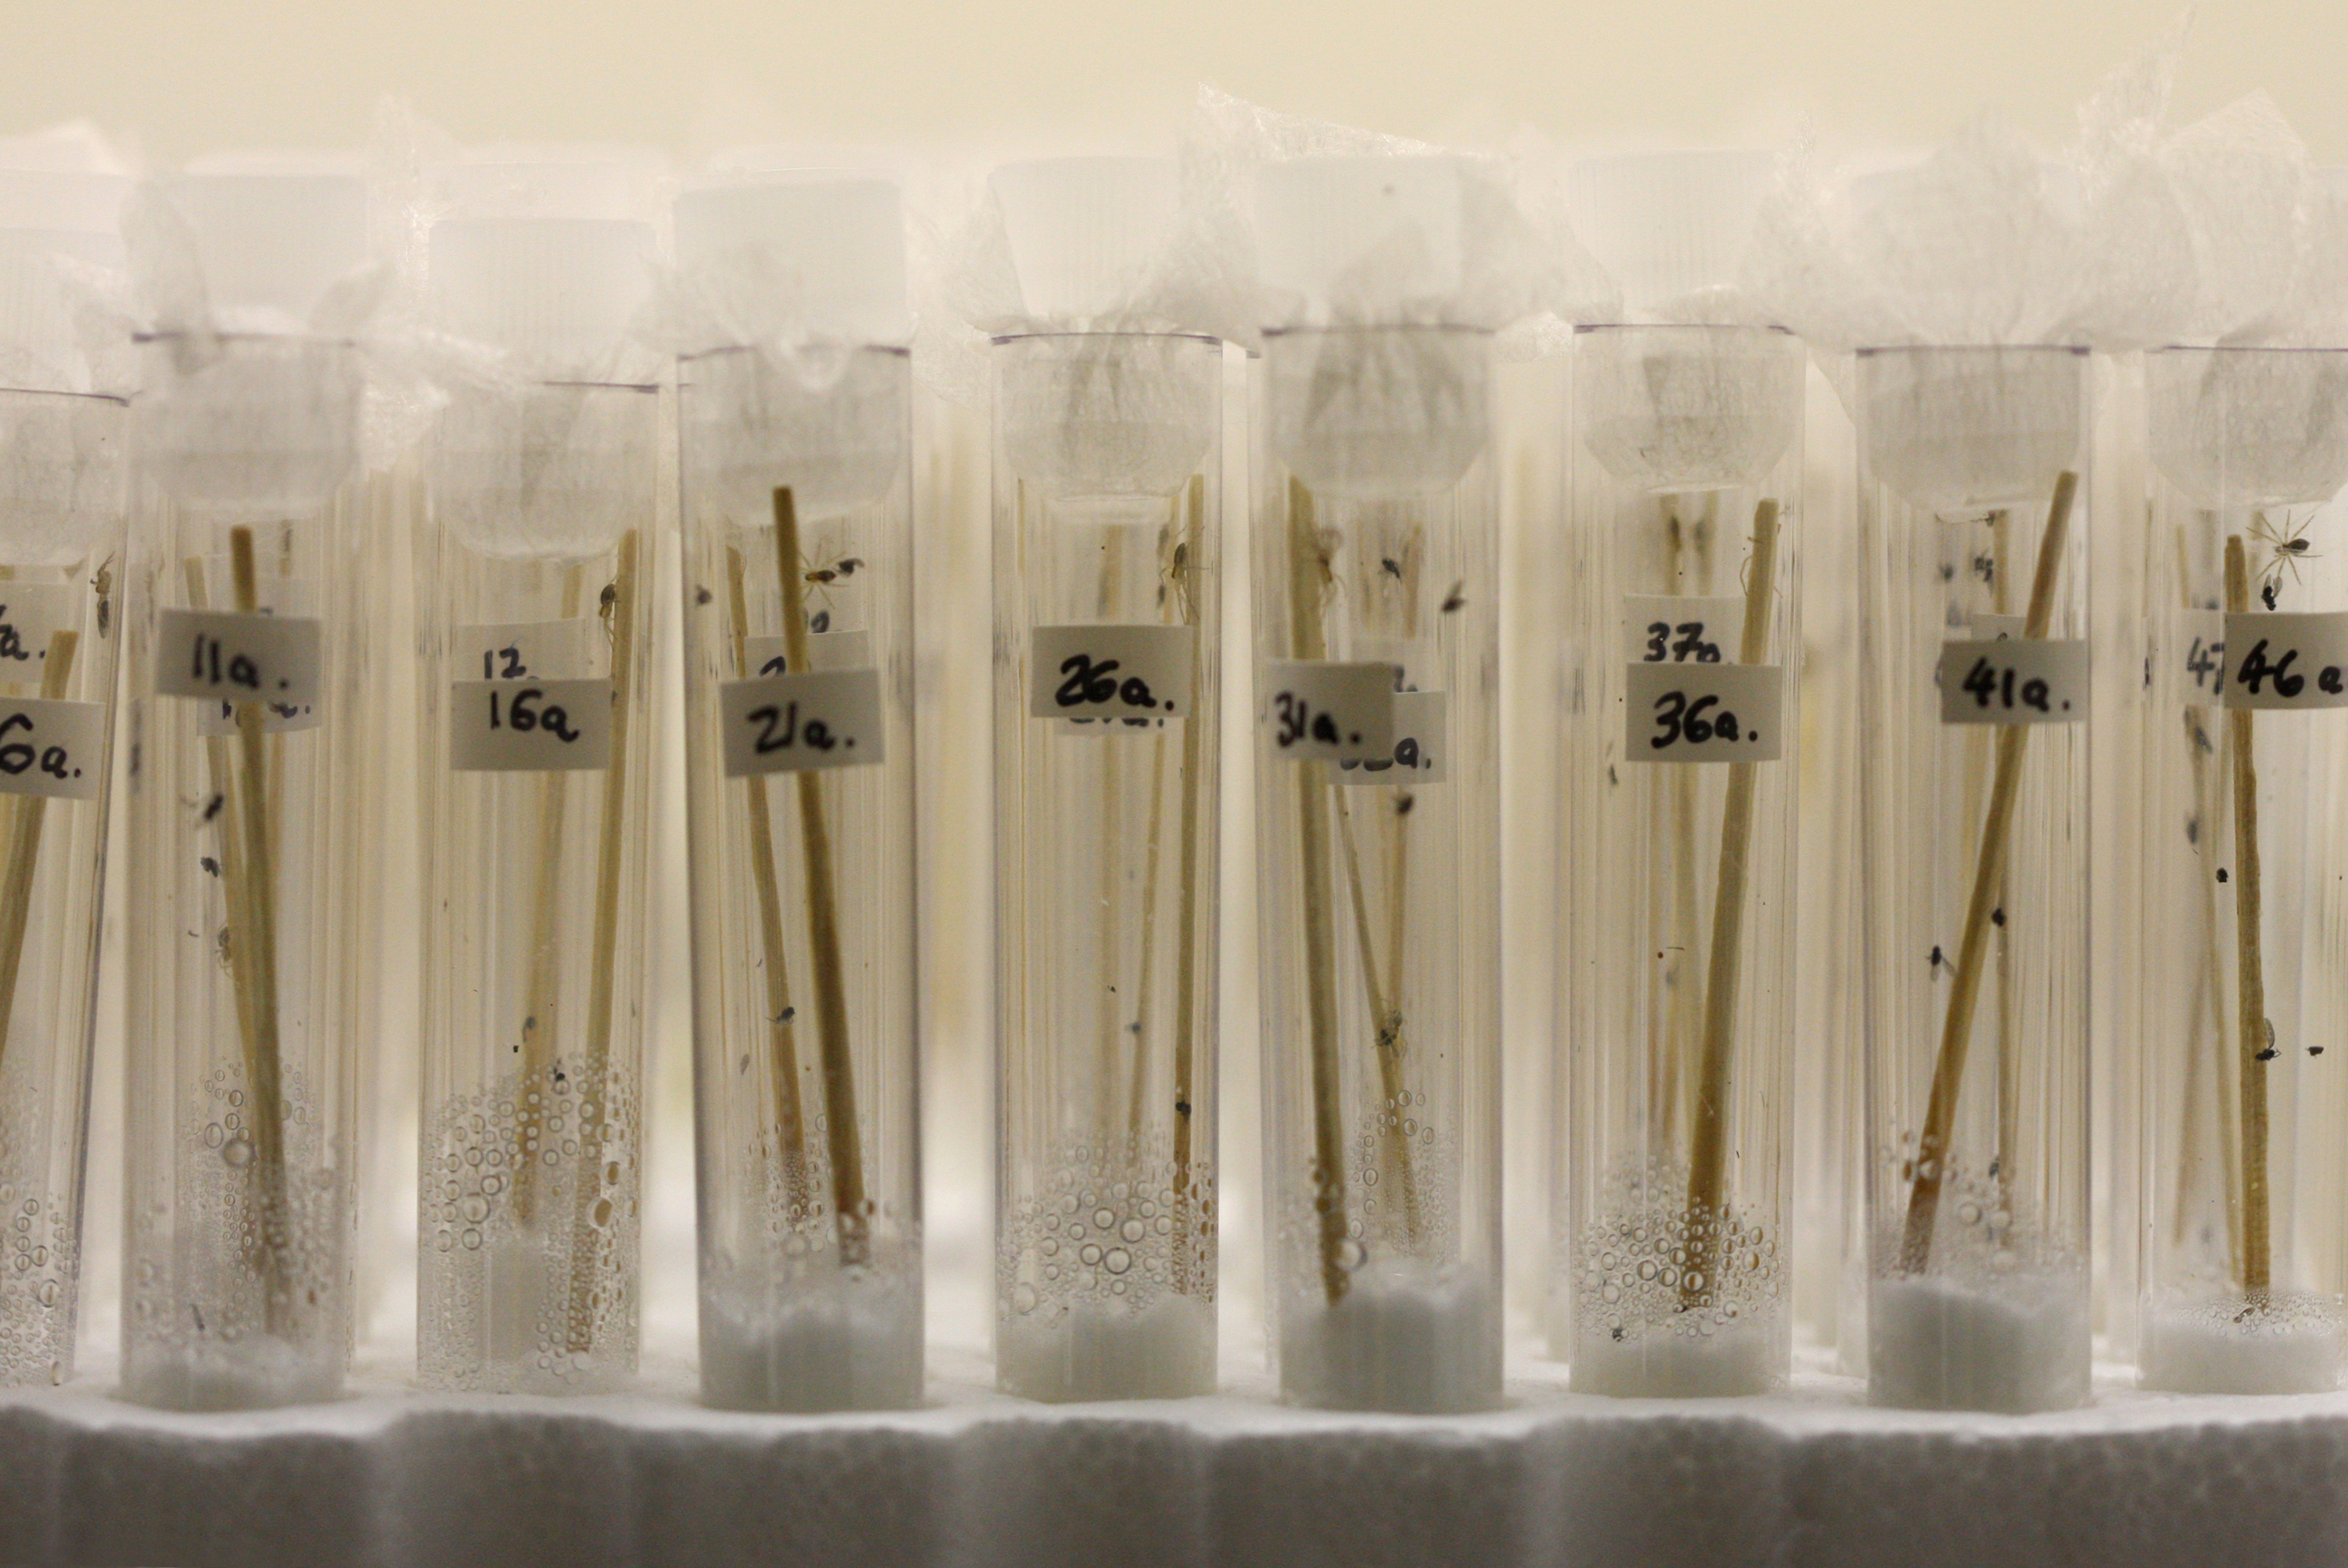 Rearing tiny spiderlings individually in test tubes gave over 90% survival